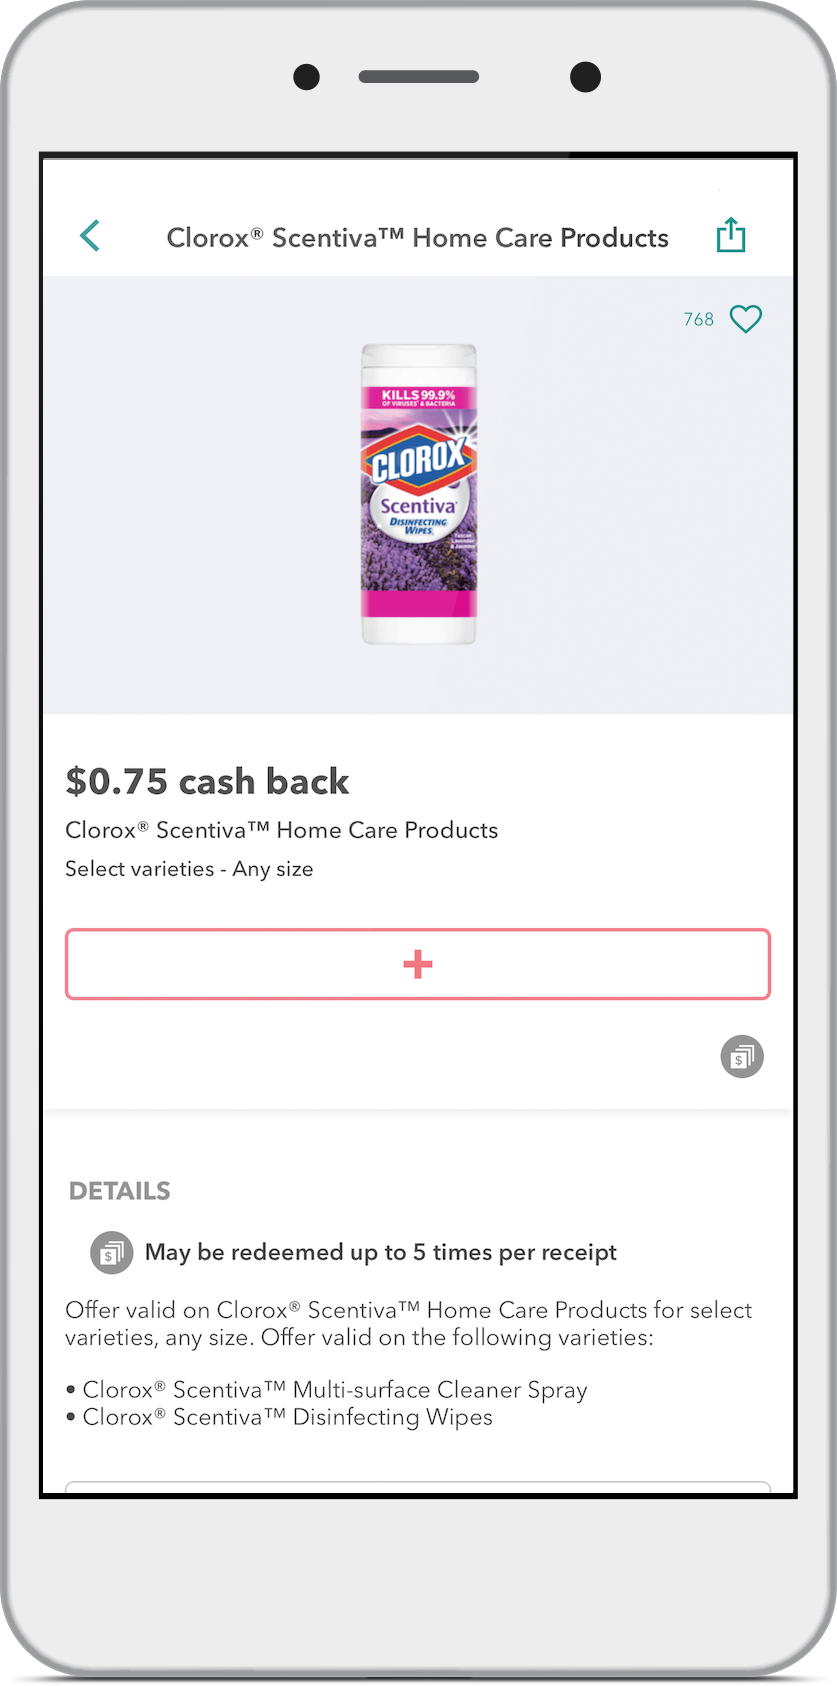 Phone Screen of a Clorox offer on the Ibotta app